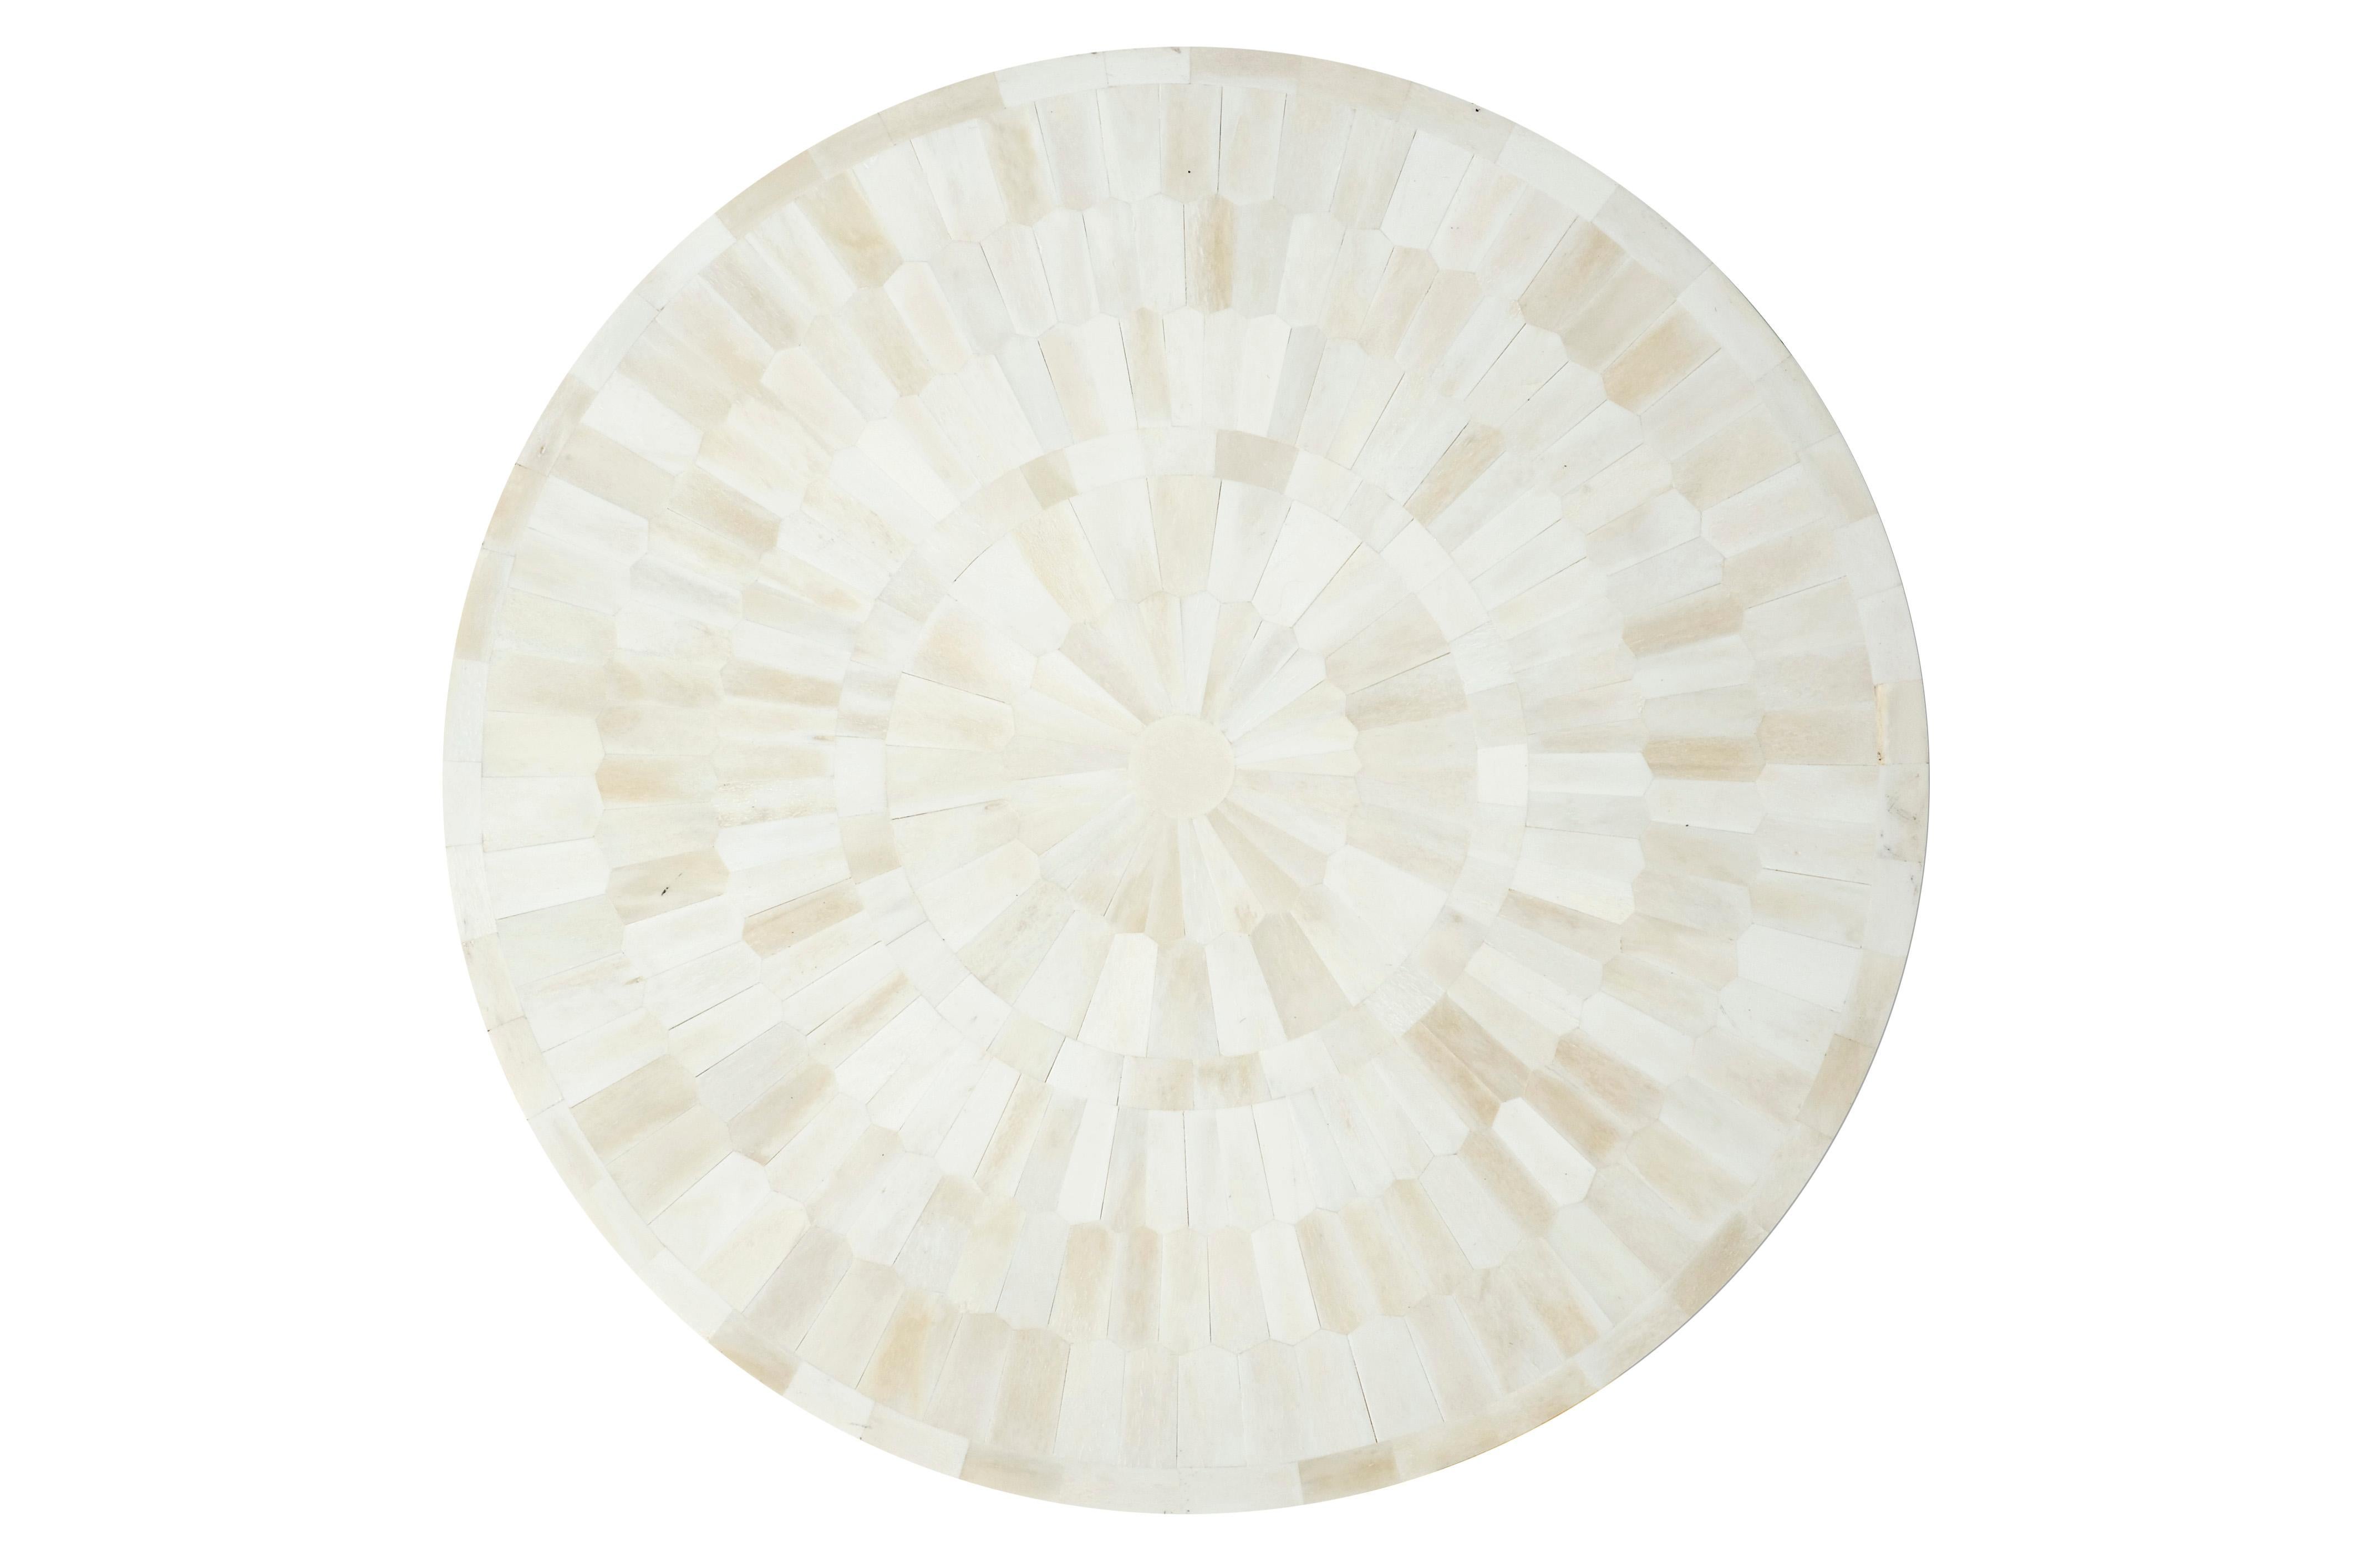 This handcrafted end table/stool offers tranquility to any space. Hundreds of hexagonal bone chips are individually hand shaped and mounted on a wooden drum form to create this harmonious tone-on-tone patterned stool. It can be customized in size